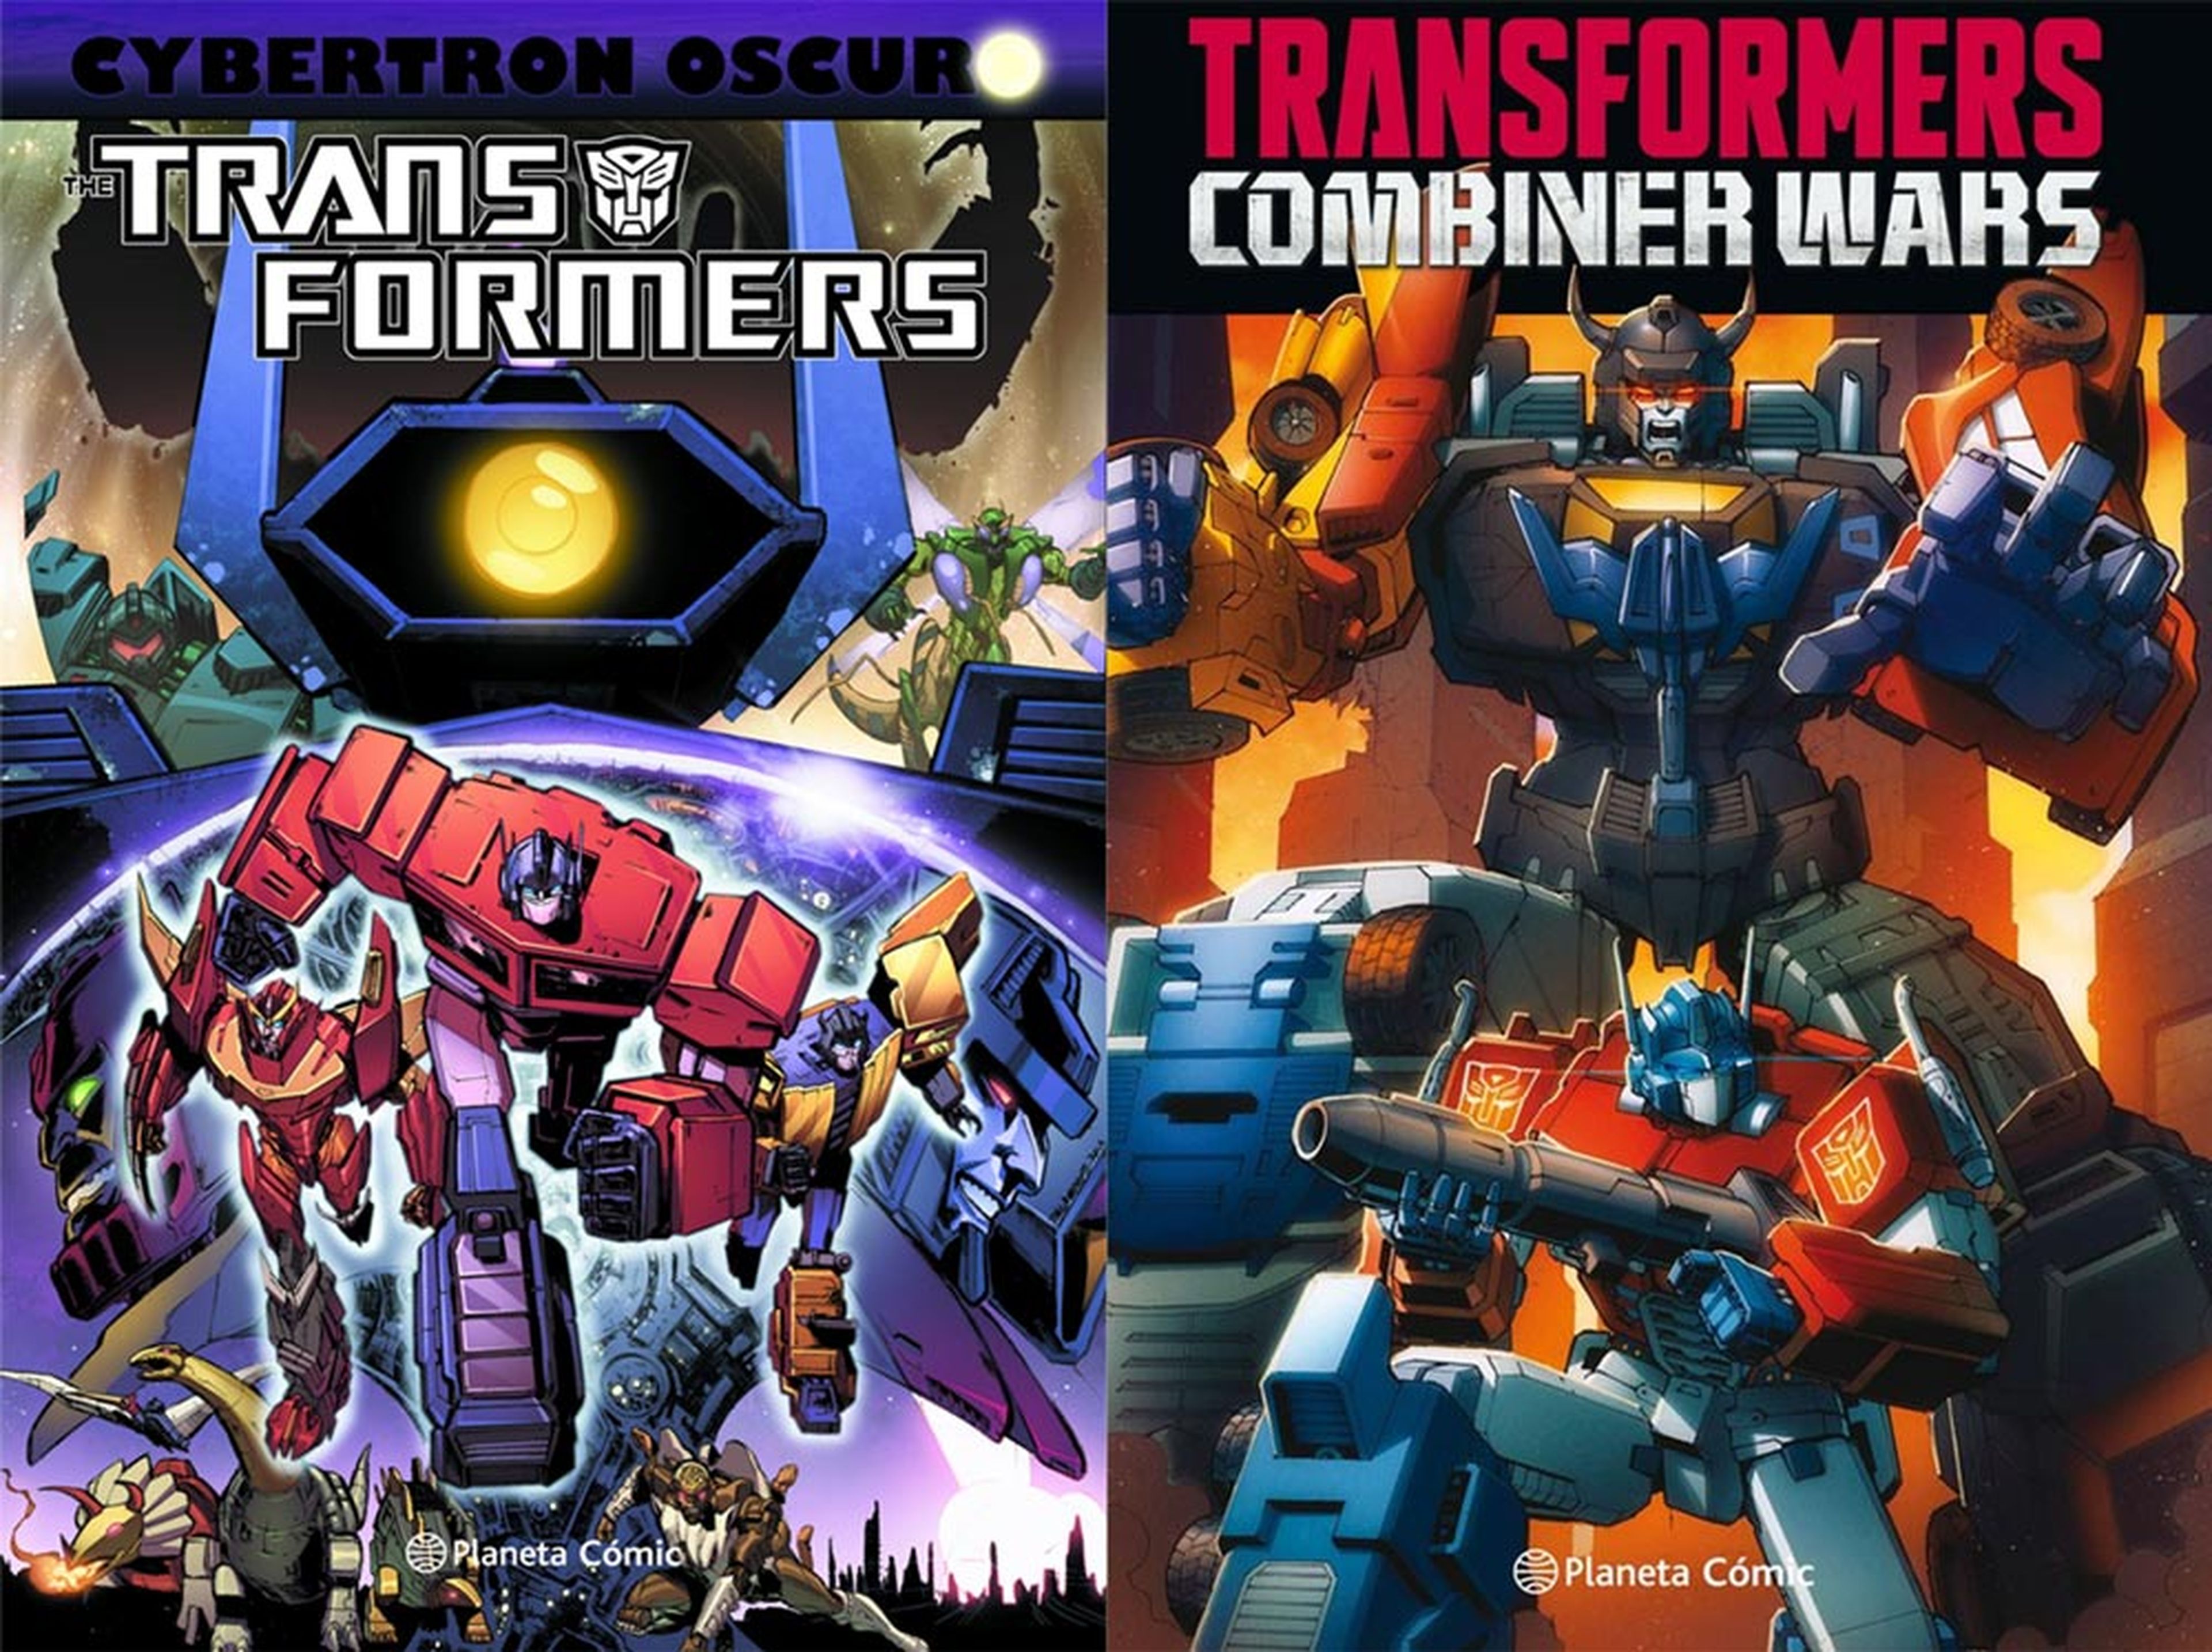 Transformers - Cybertron Oscuro / Combiner Wars